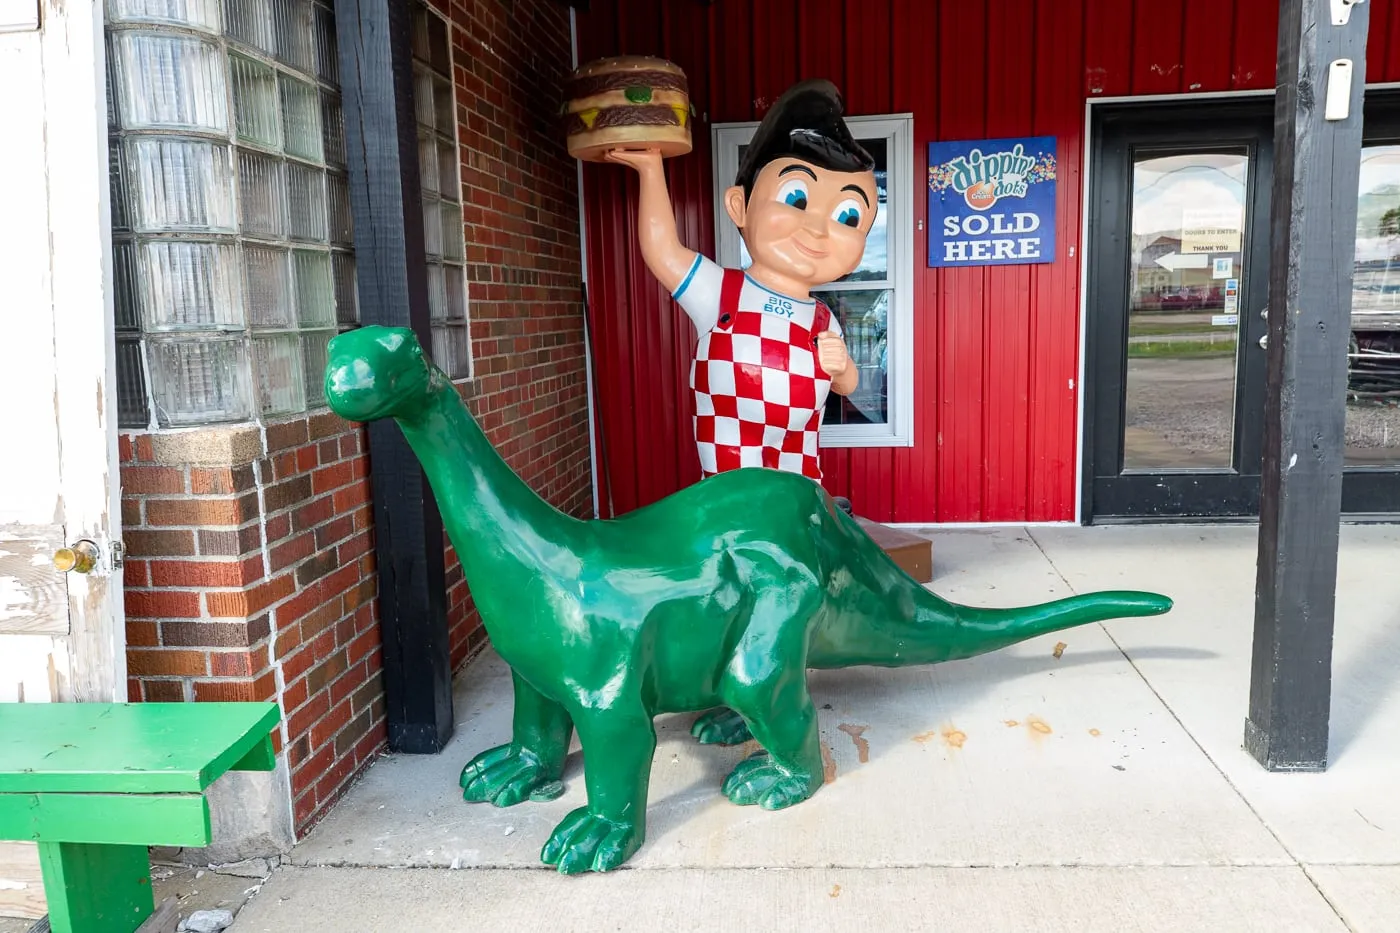 Big Boy statue and Sinclair Dinosaur at the Pink Elephant Antique Mall in Livingston, Illinois - Route 66 Roadside Attraction